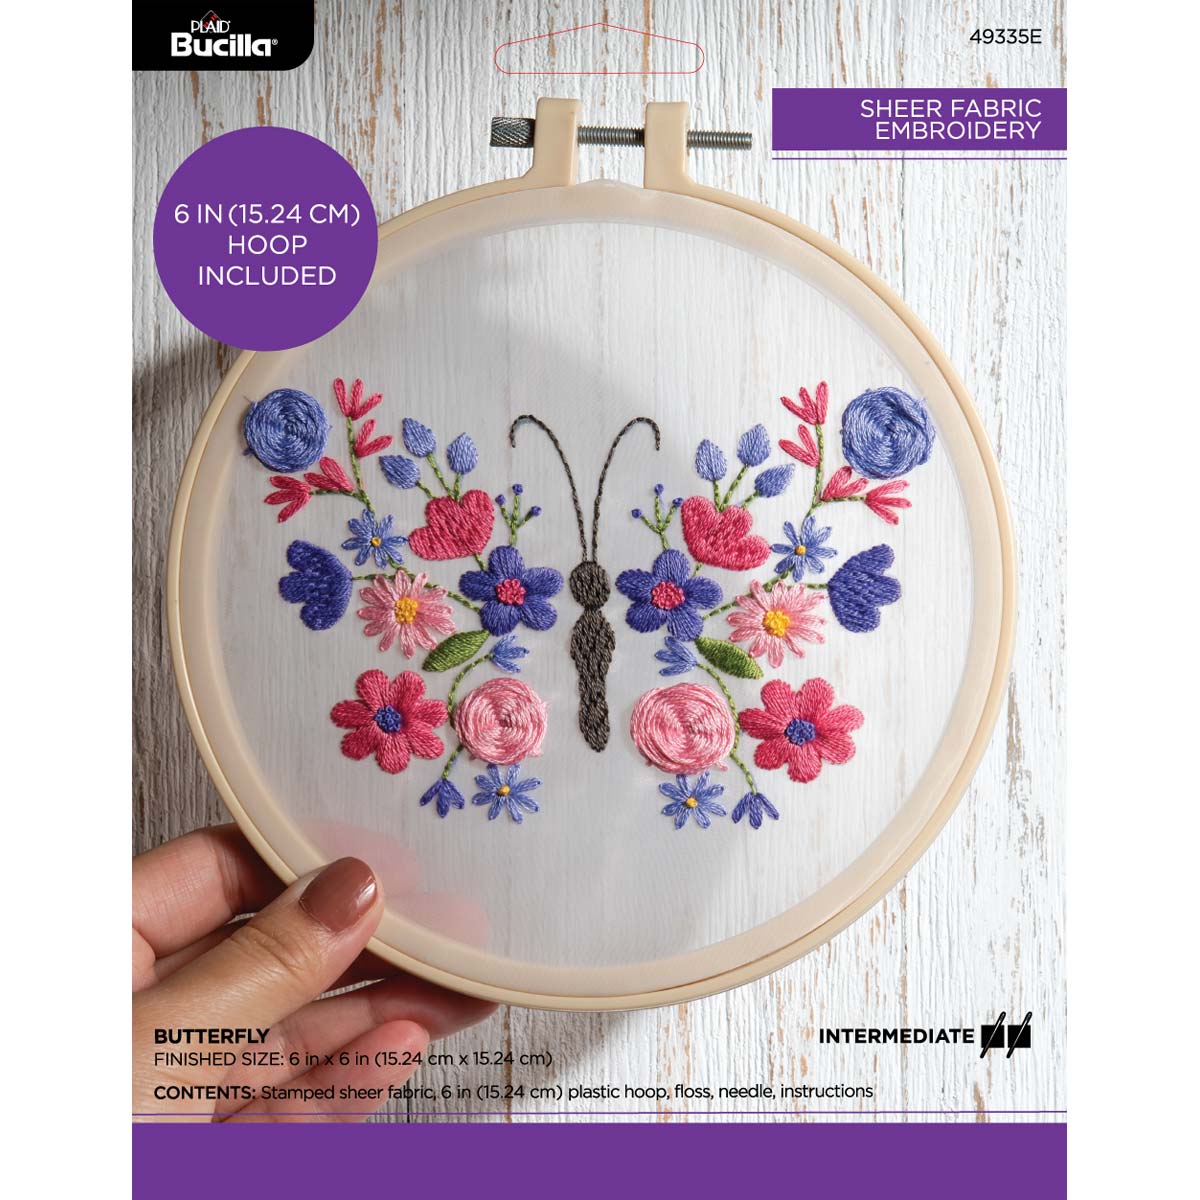 Bucilla ® Stamped Sheer Fabric Embroidery - Butterfly - 49335E